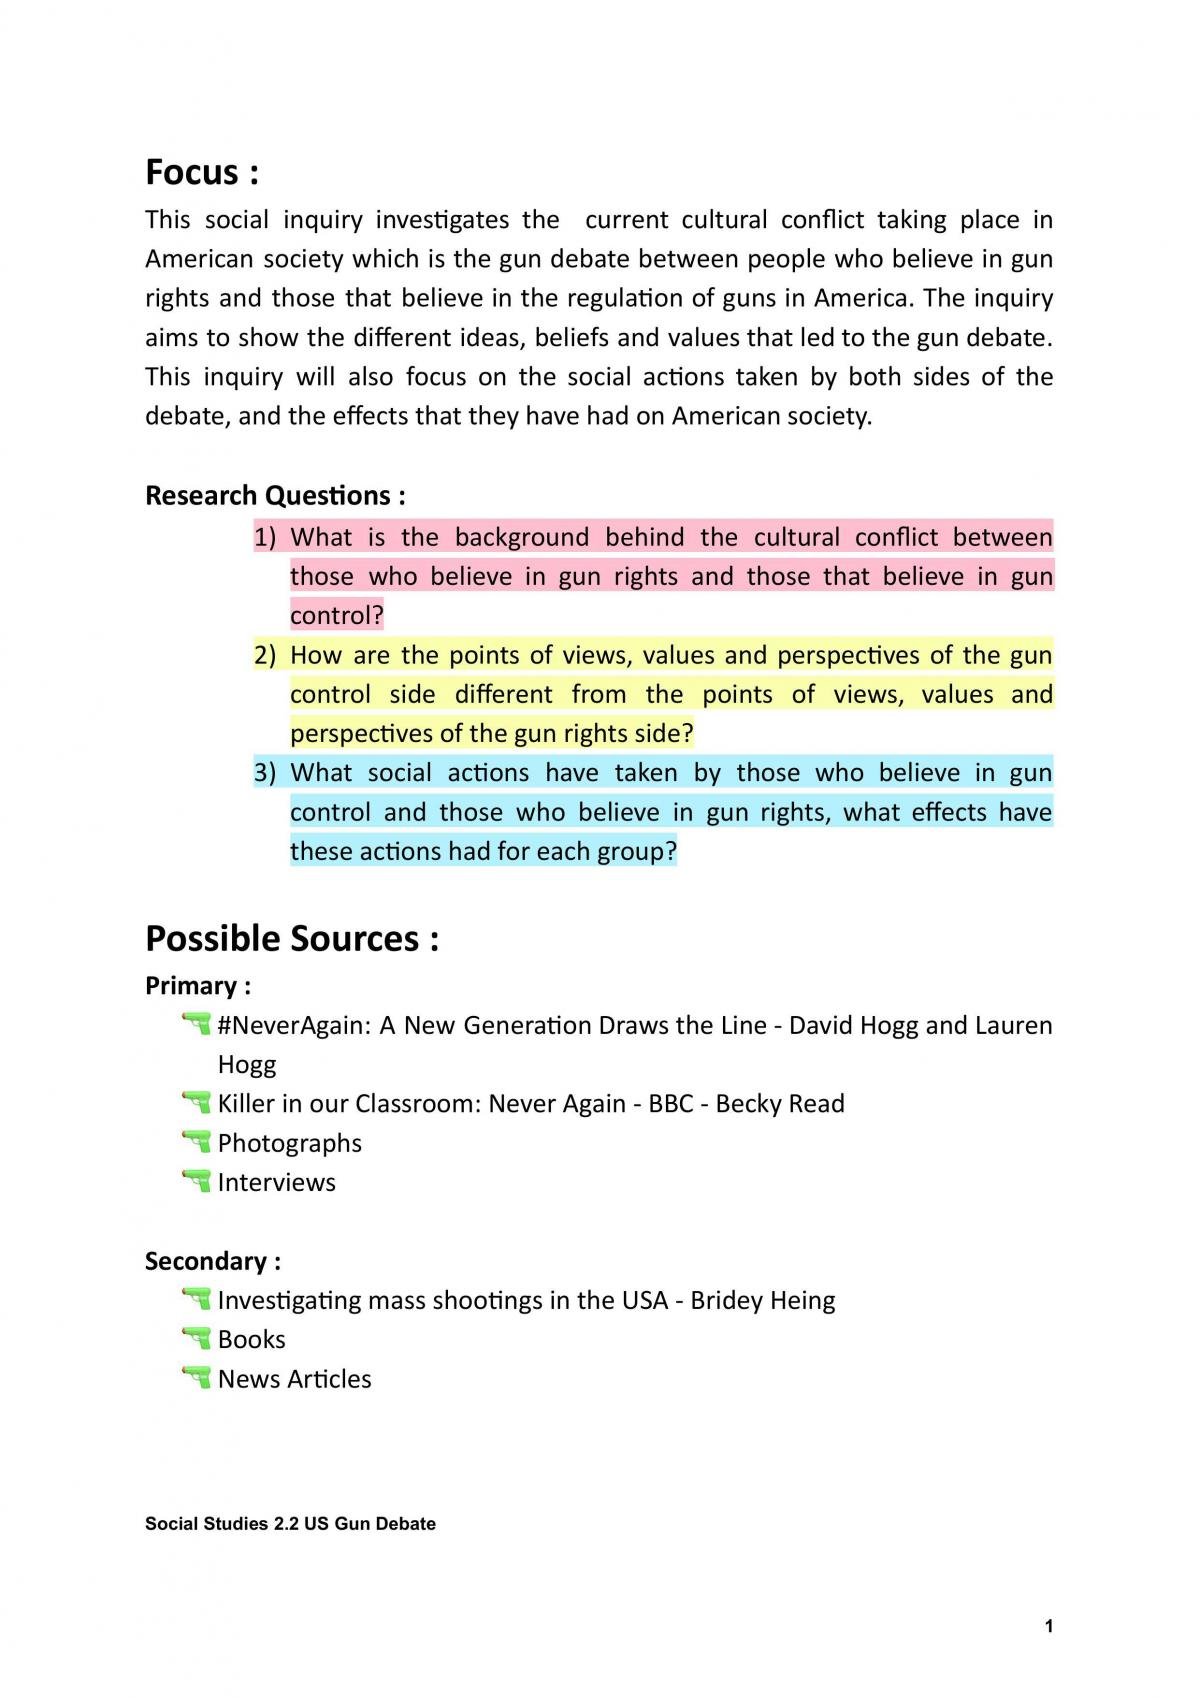 2.2 Social Studies 91280 - Social Inquiry - Page 2